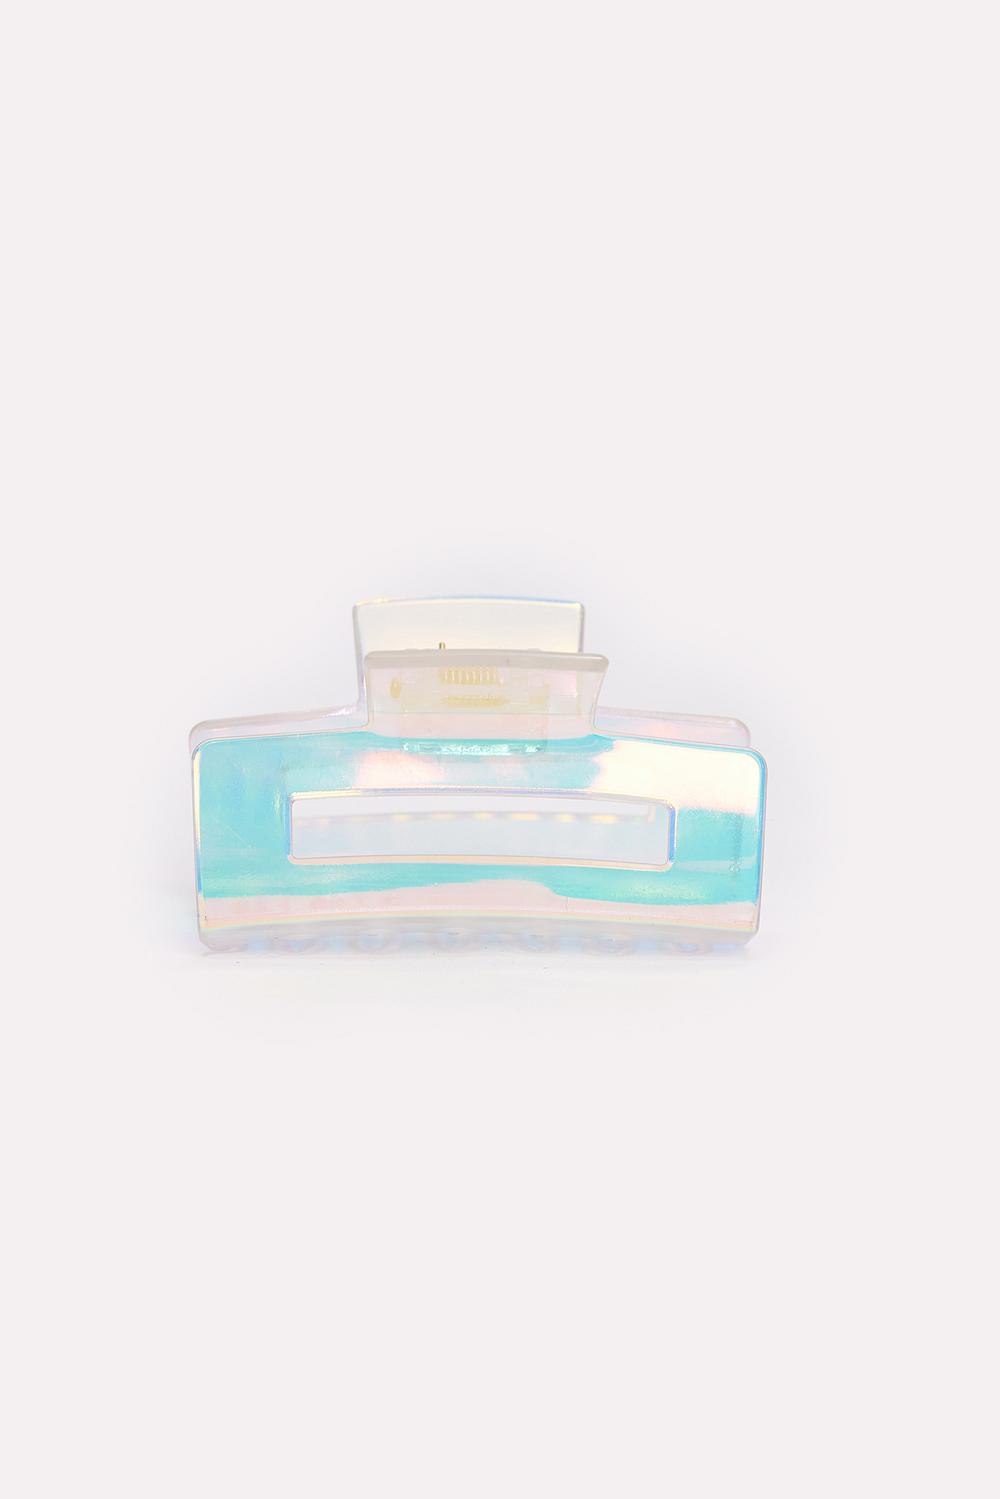 Hair clip with holographic print